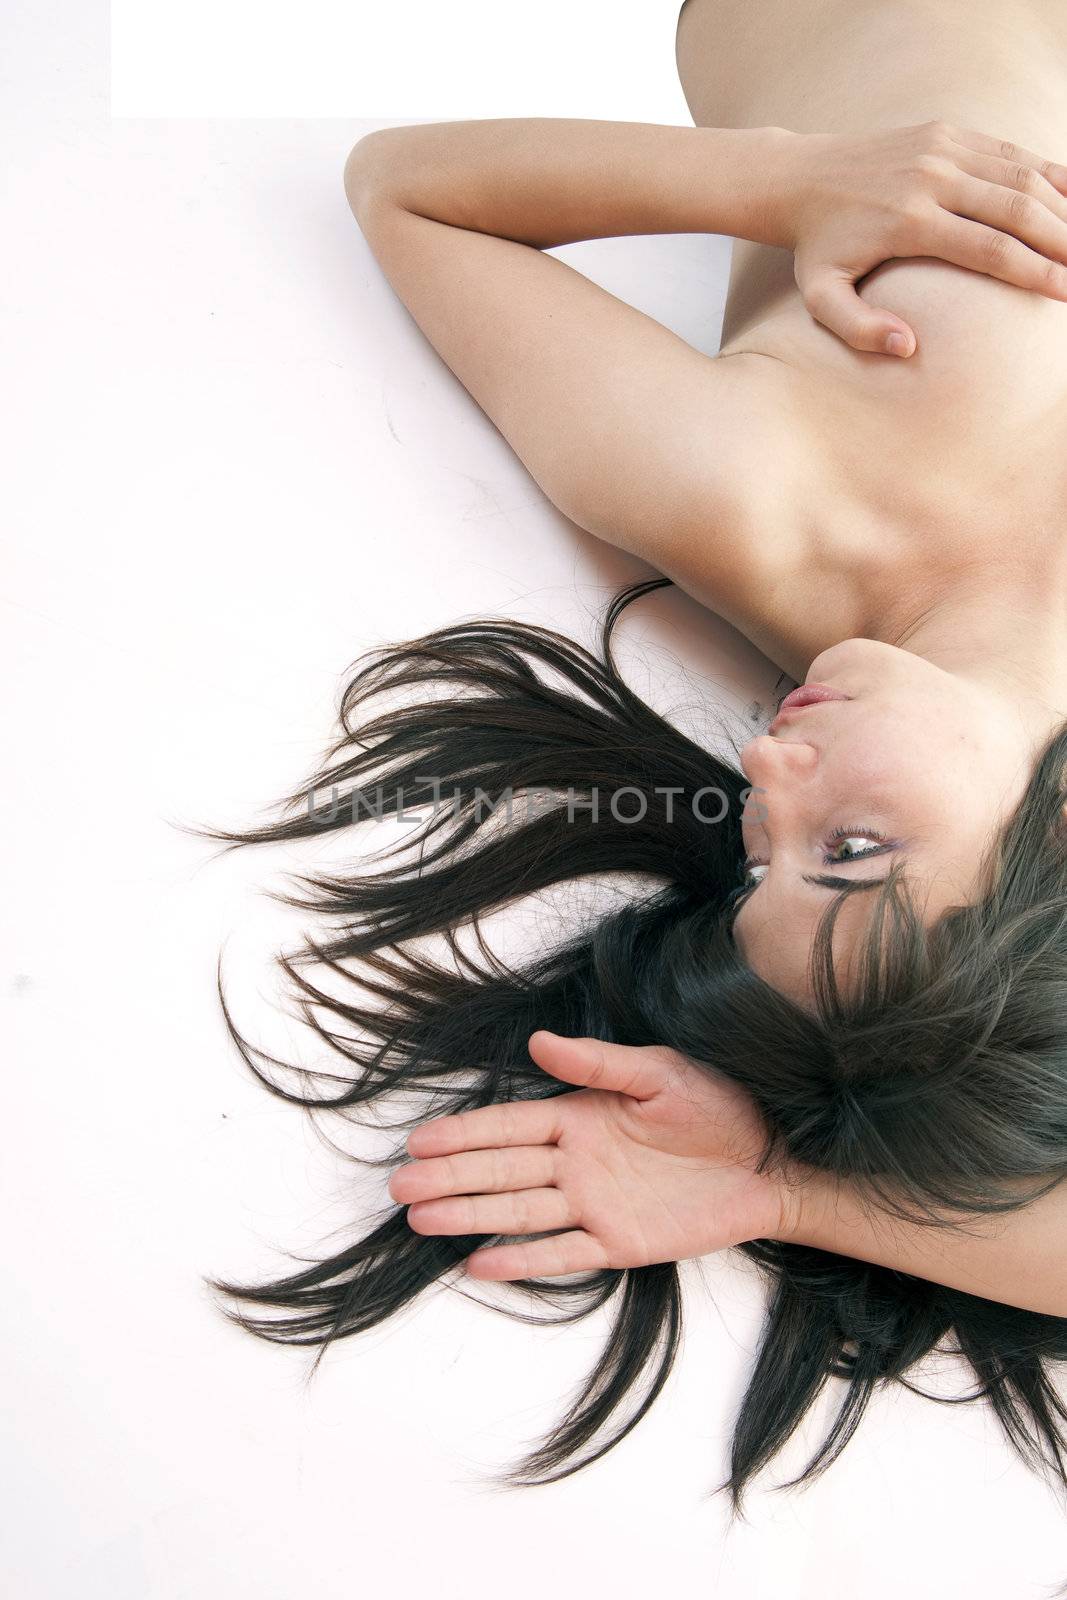 Sexy Model Holding Breast With Hands